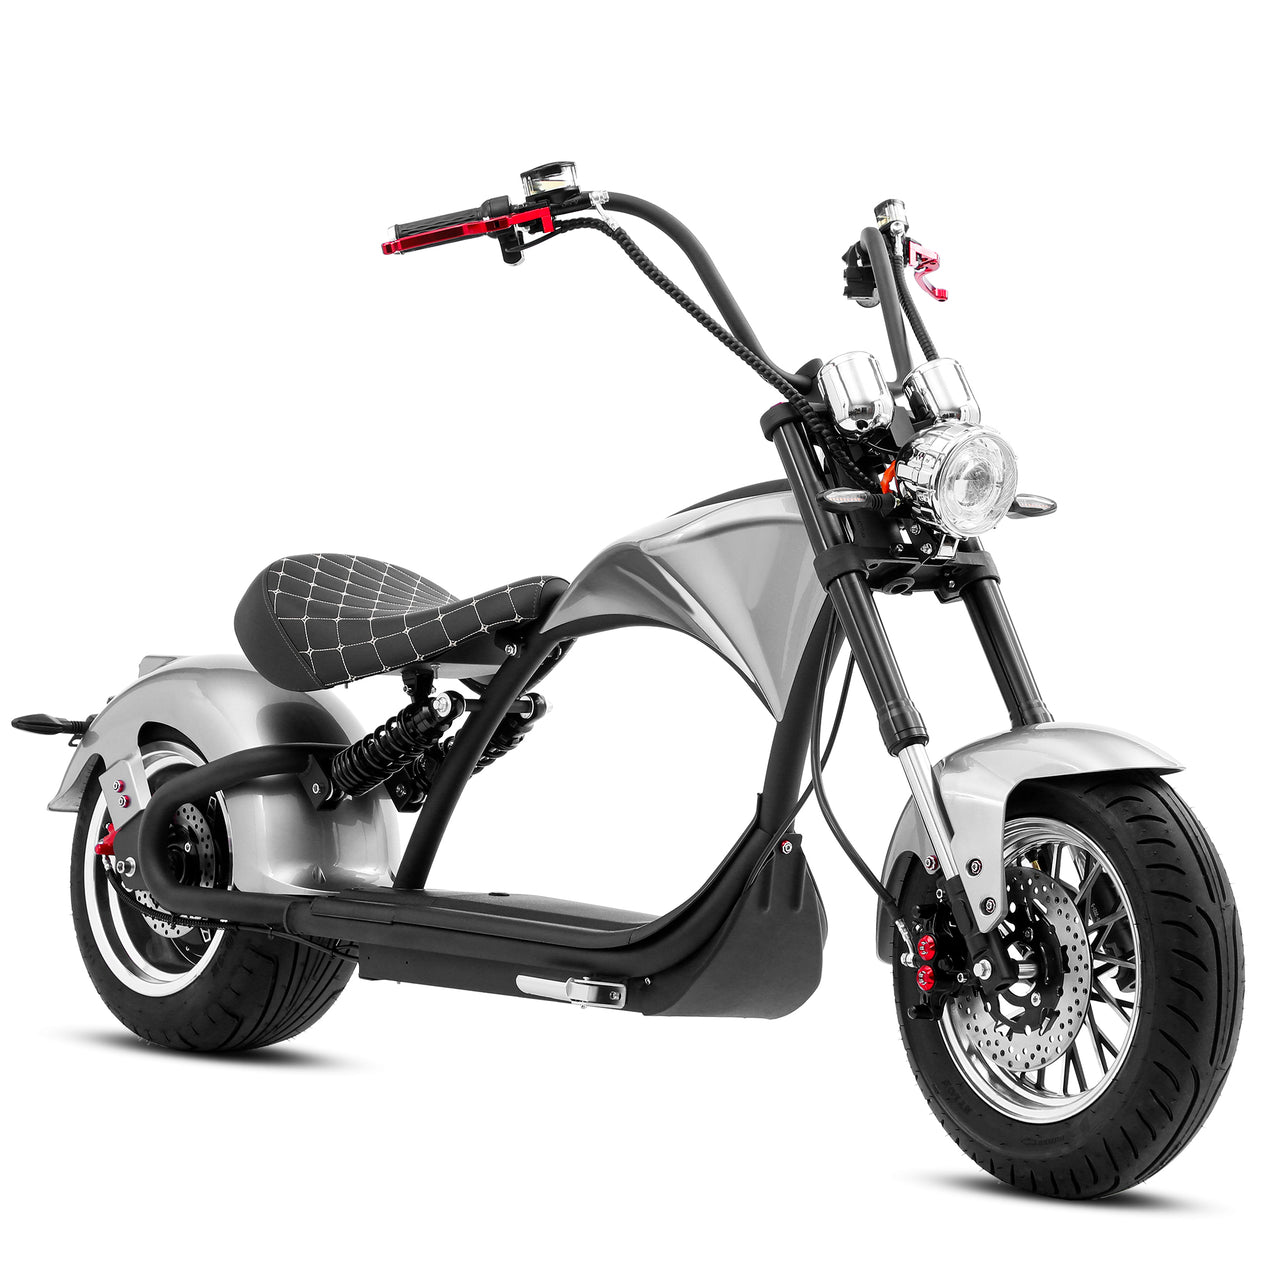  Eahora Emars M1P 2000W Electric Scooter With 60V 30AH 1.8KWH Battery - 37MPH -Silver